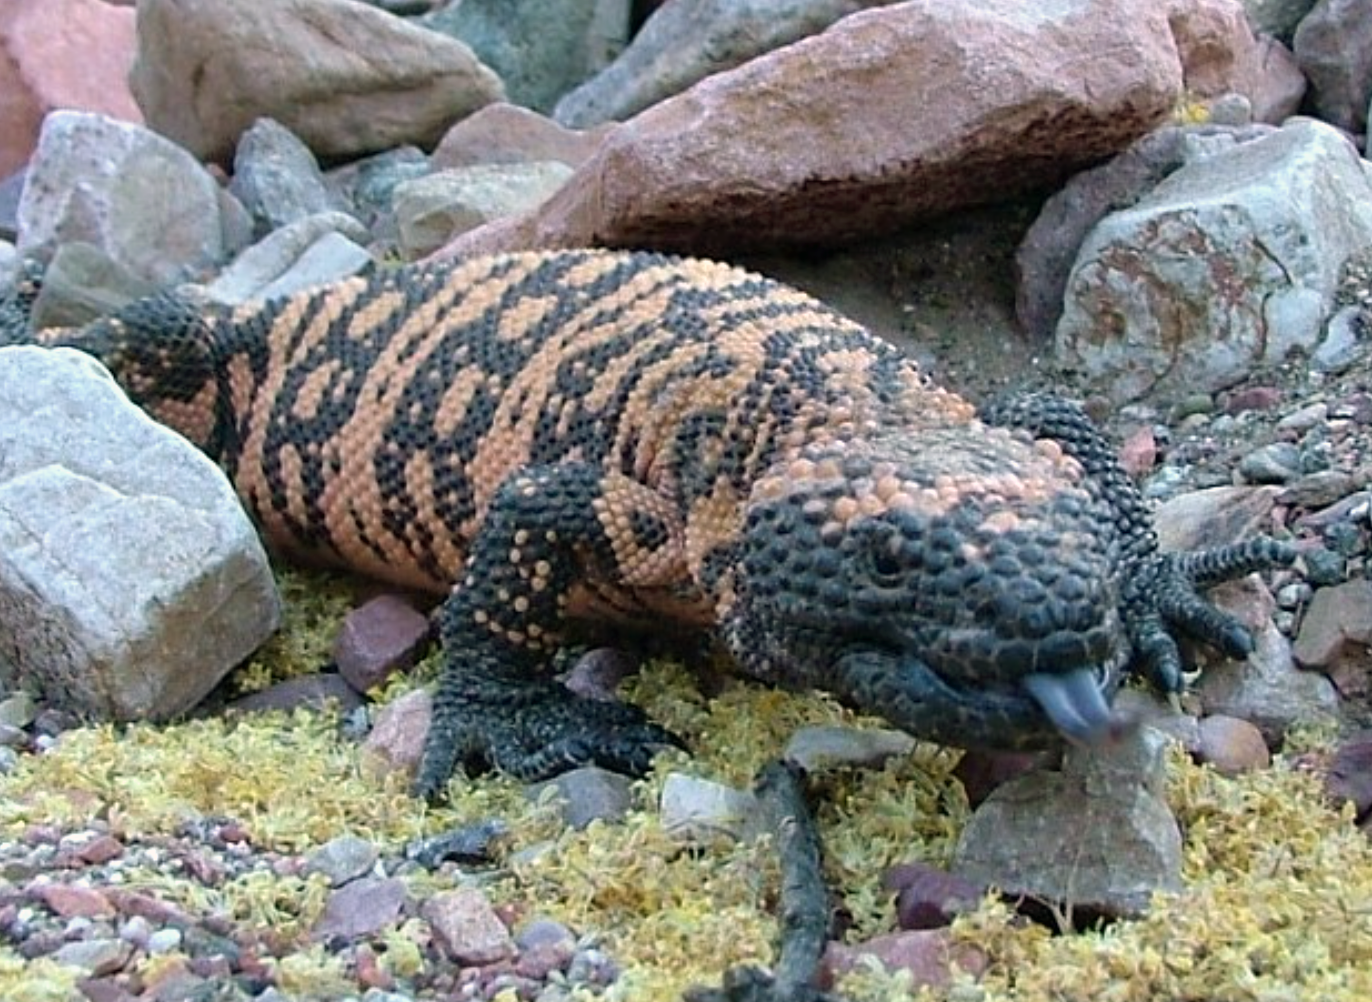 Black and orange Gila monster with tongue protruding standing on rocky surface.